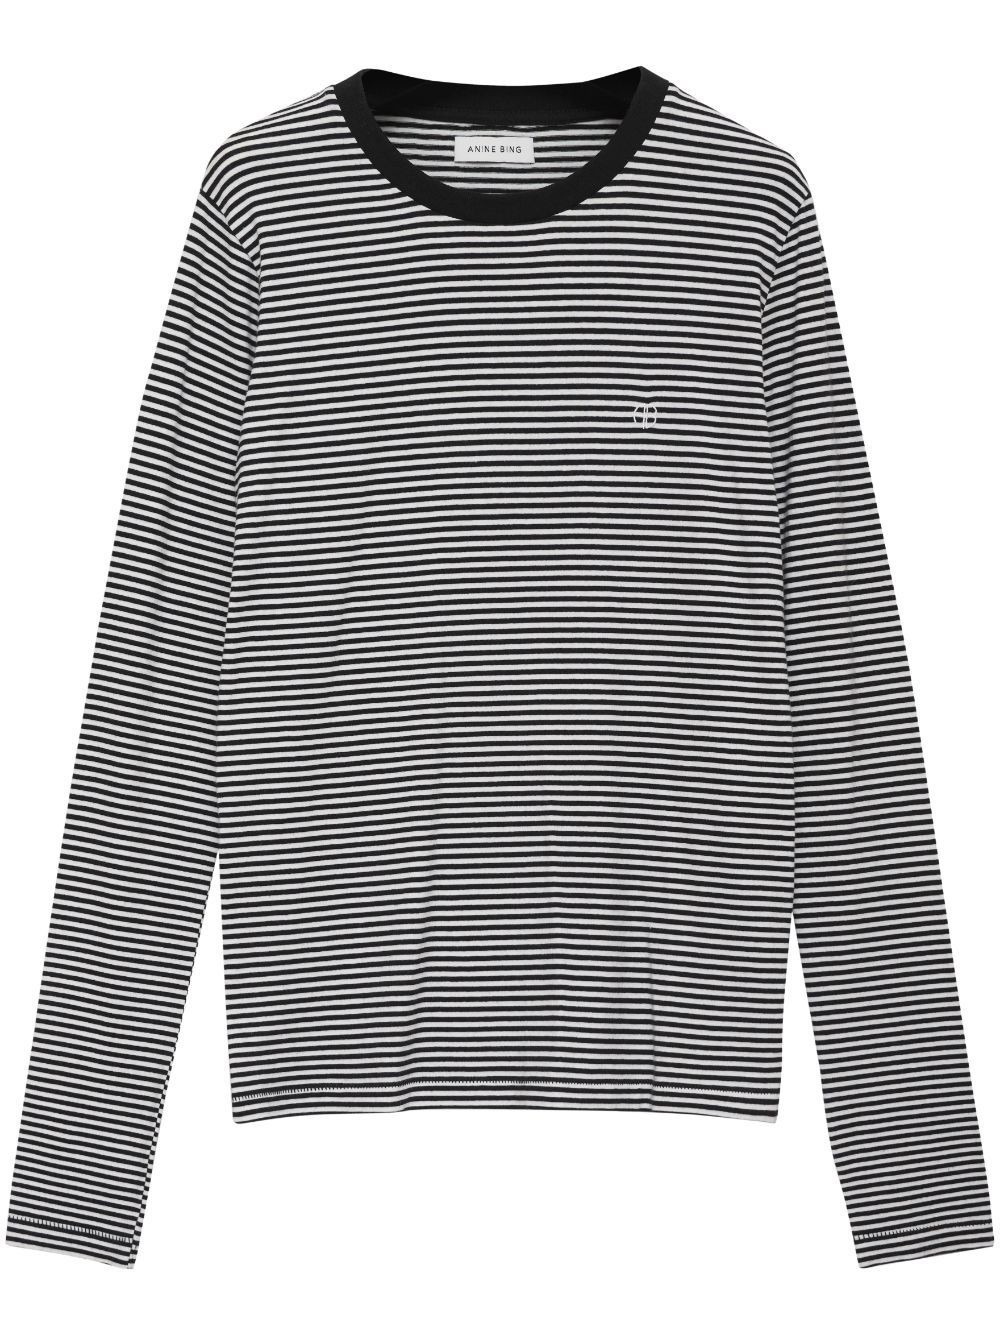 ANINE BING EMBROIDERED-LOGO STRIPED TOP